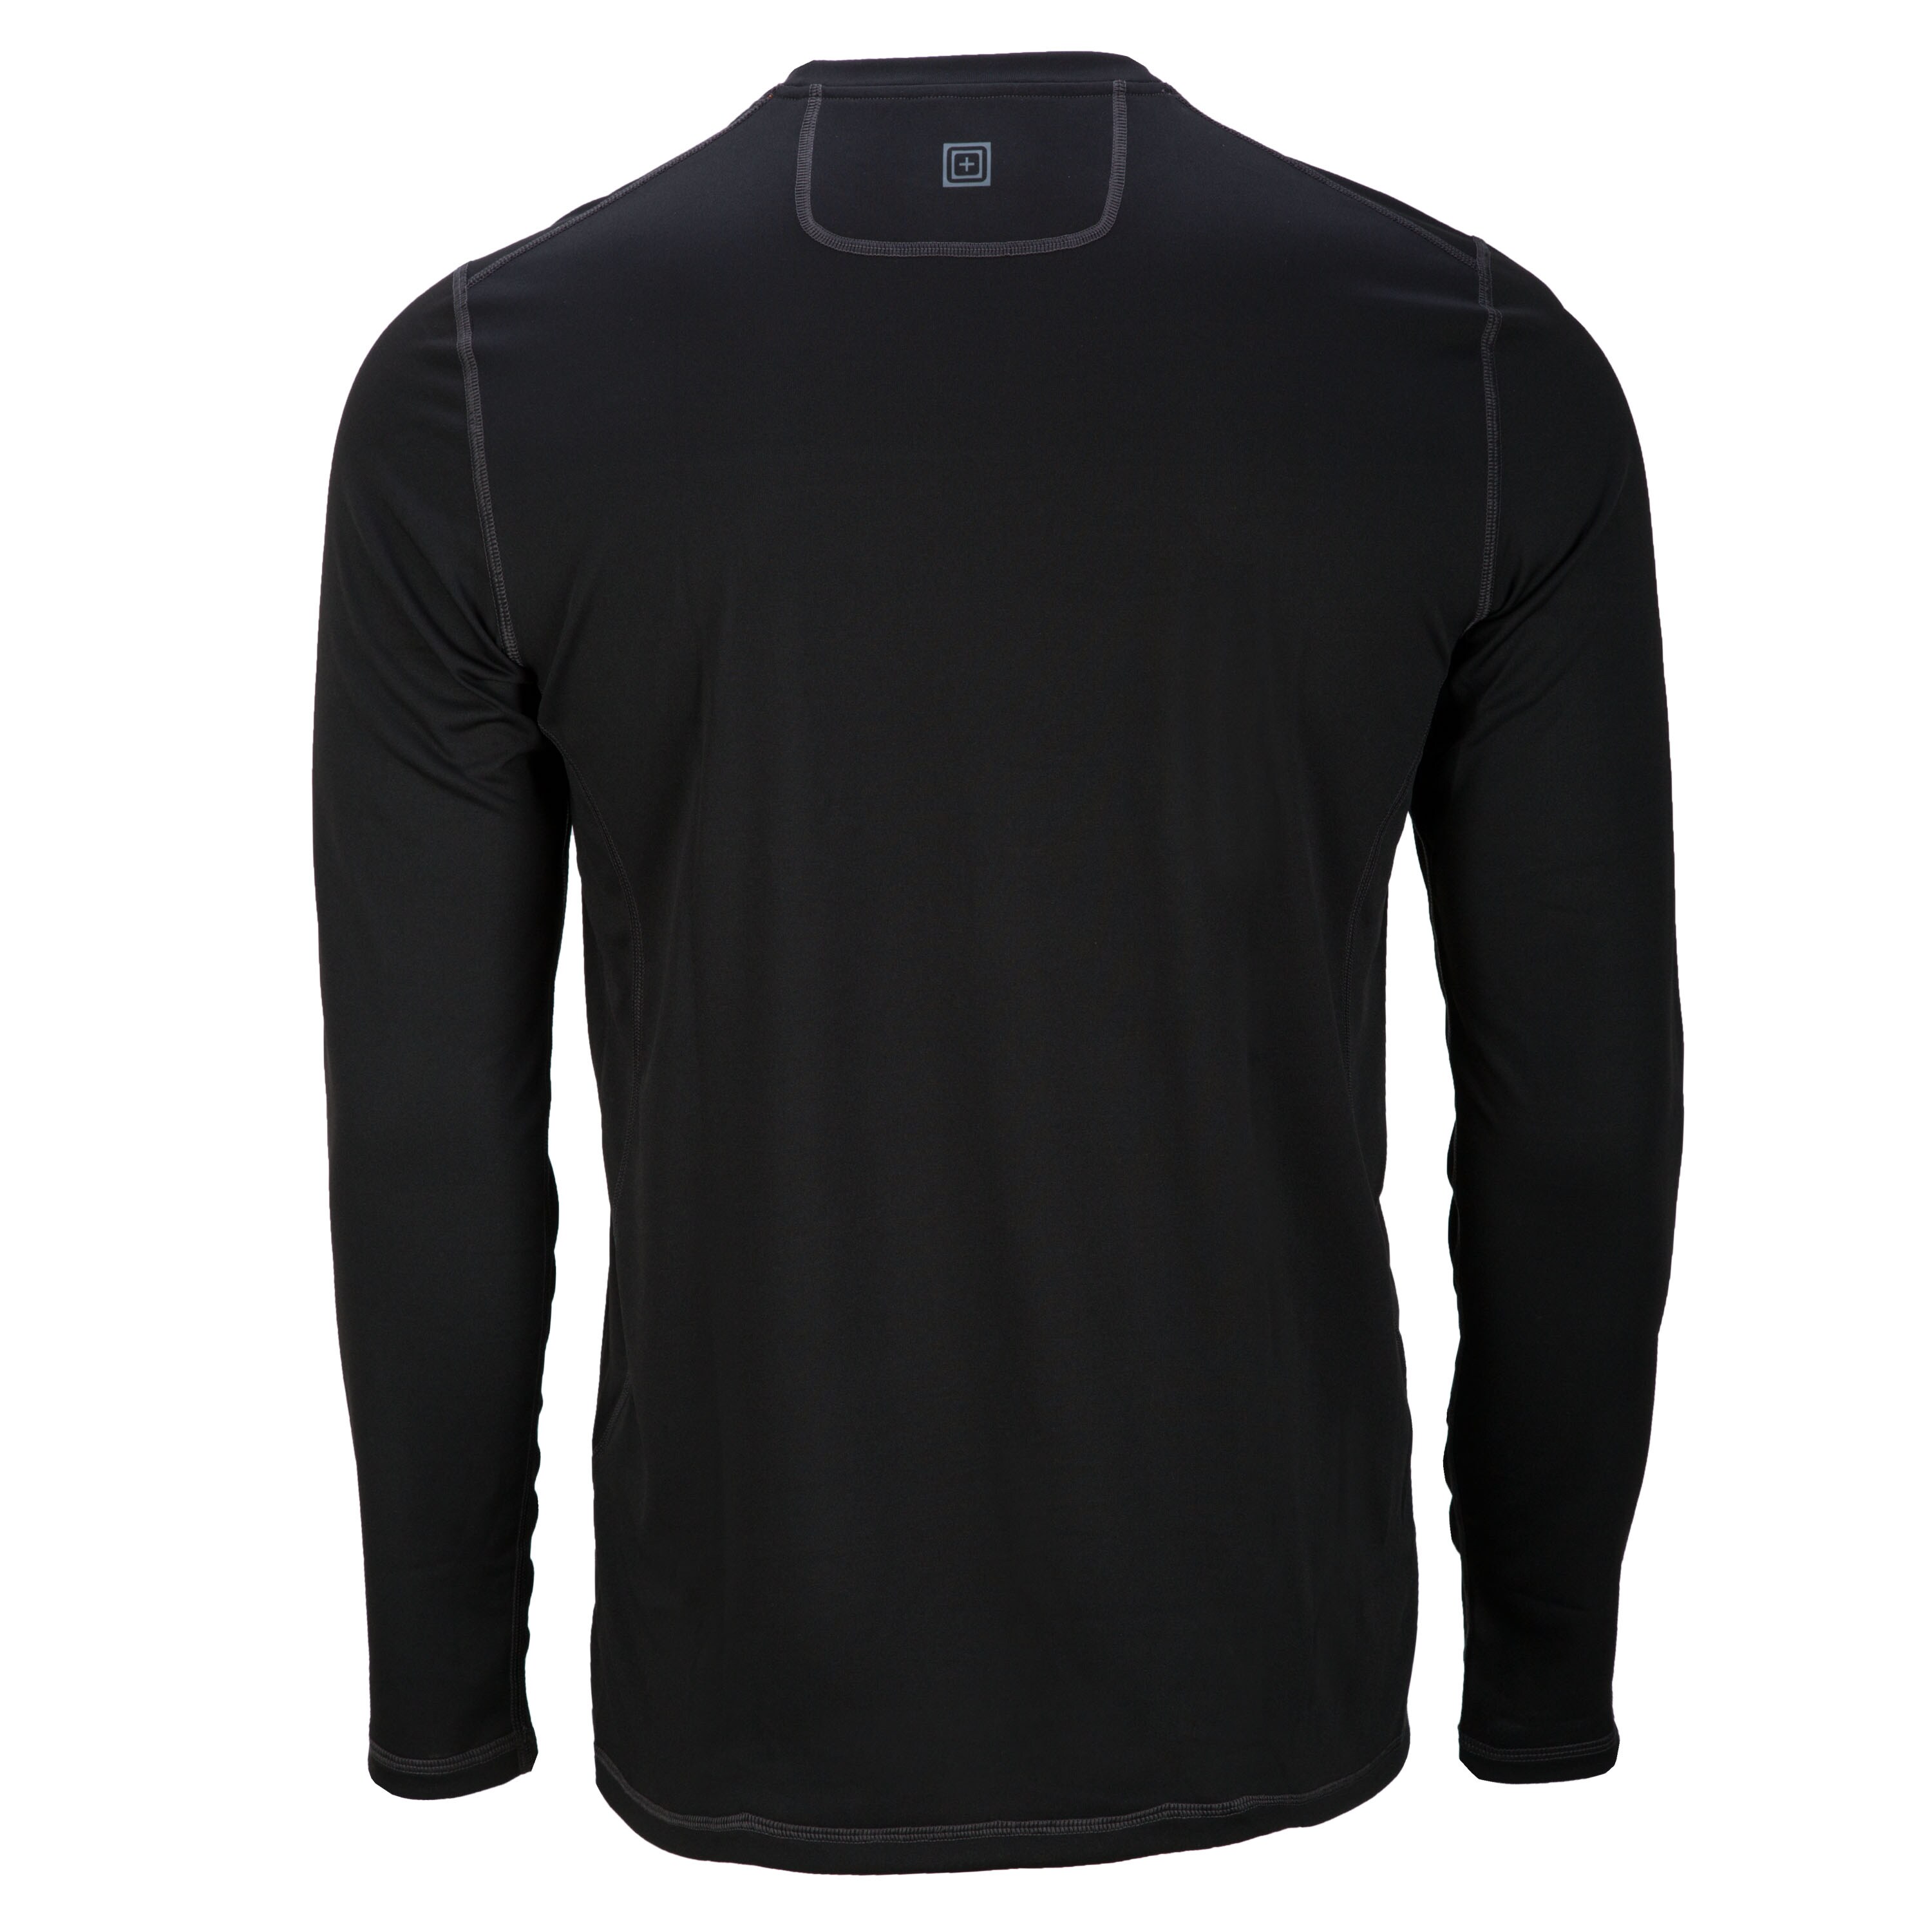 Purchase the 5.11 Long Sleeve Range Ready black by ASMC